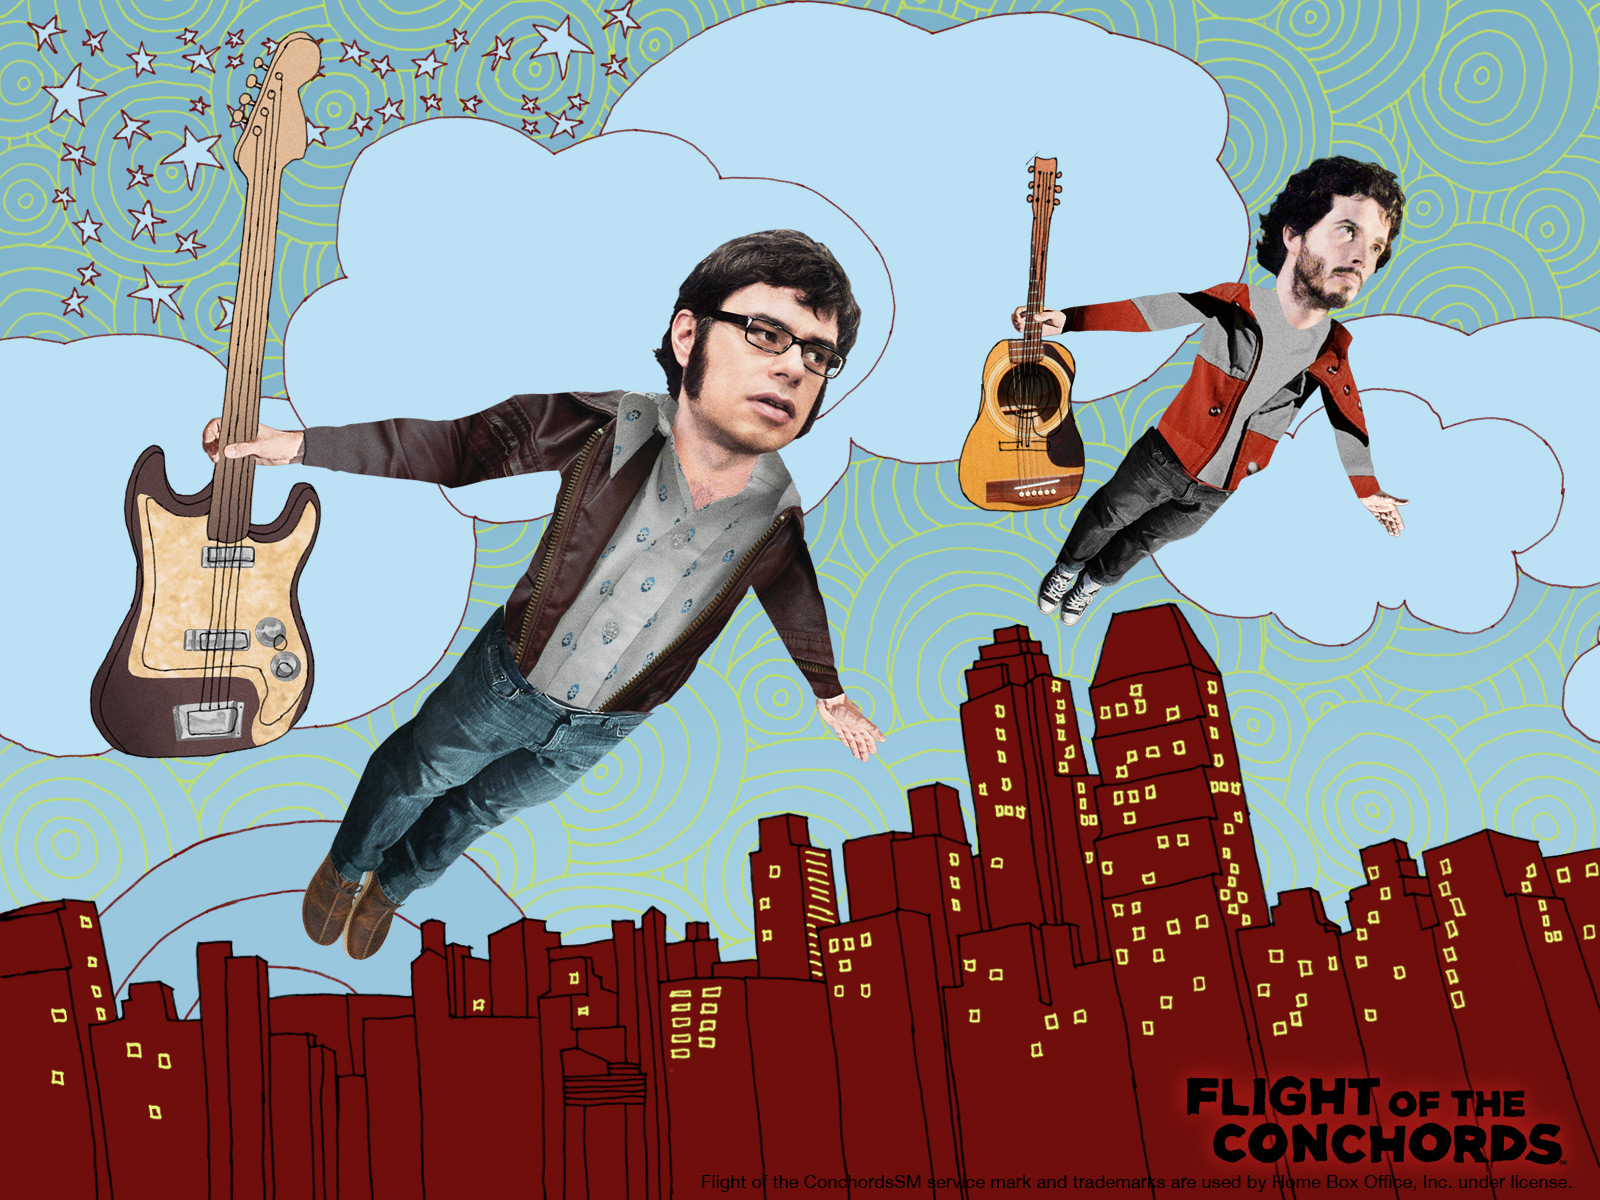 ‘flight of the conchords’ hbo renewal rumors